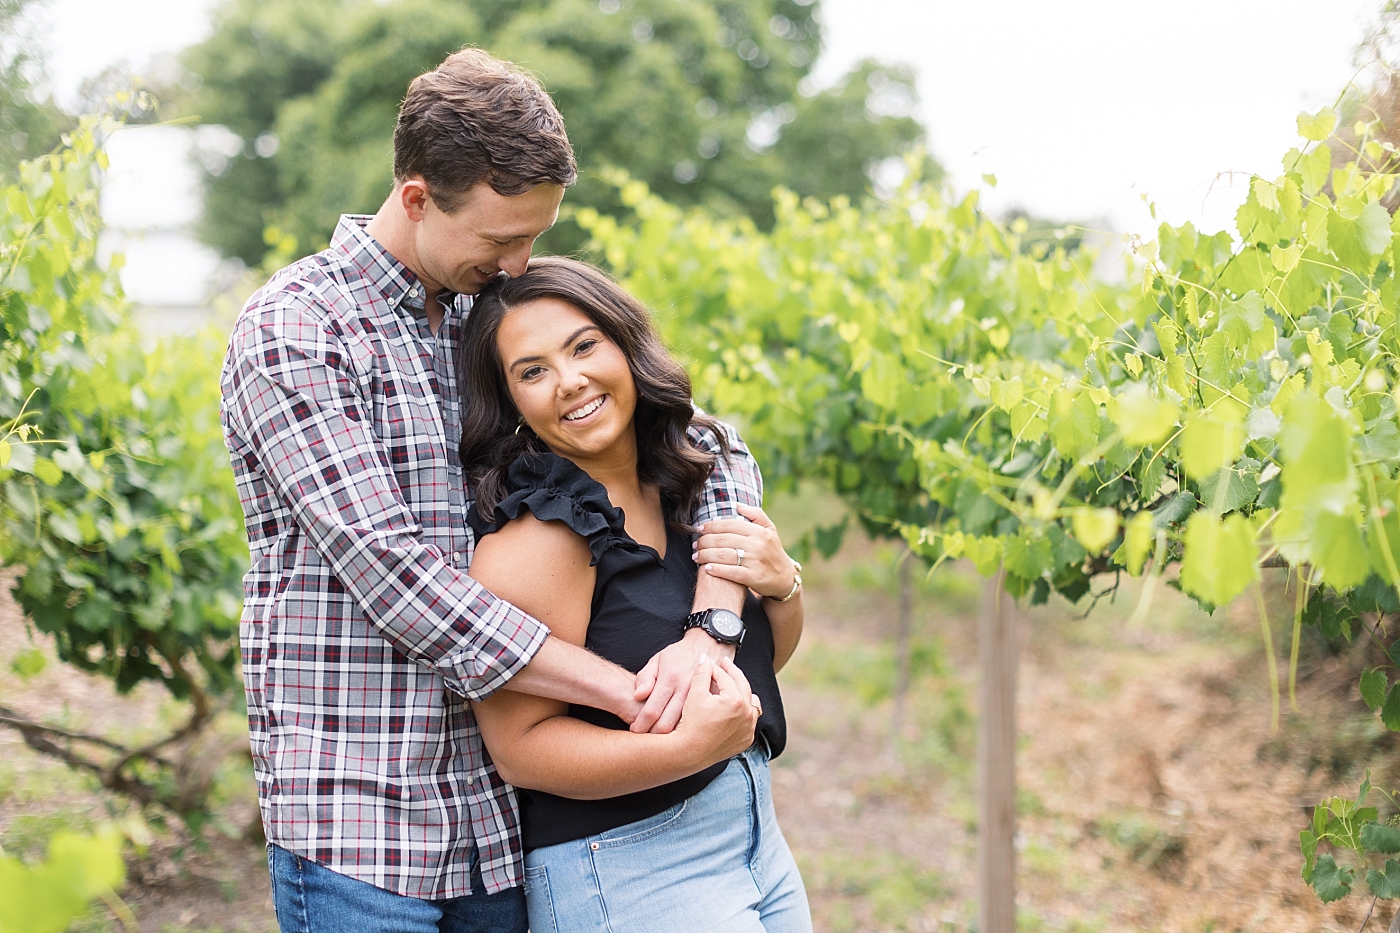 Raleigh Engagement Photos at Historic Oak View Park on a Farm | Raleigh Engagement Photographer